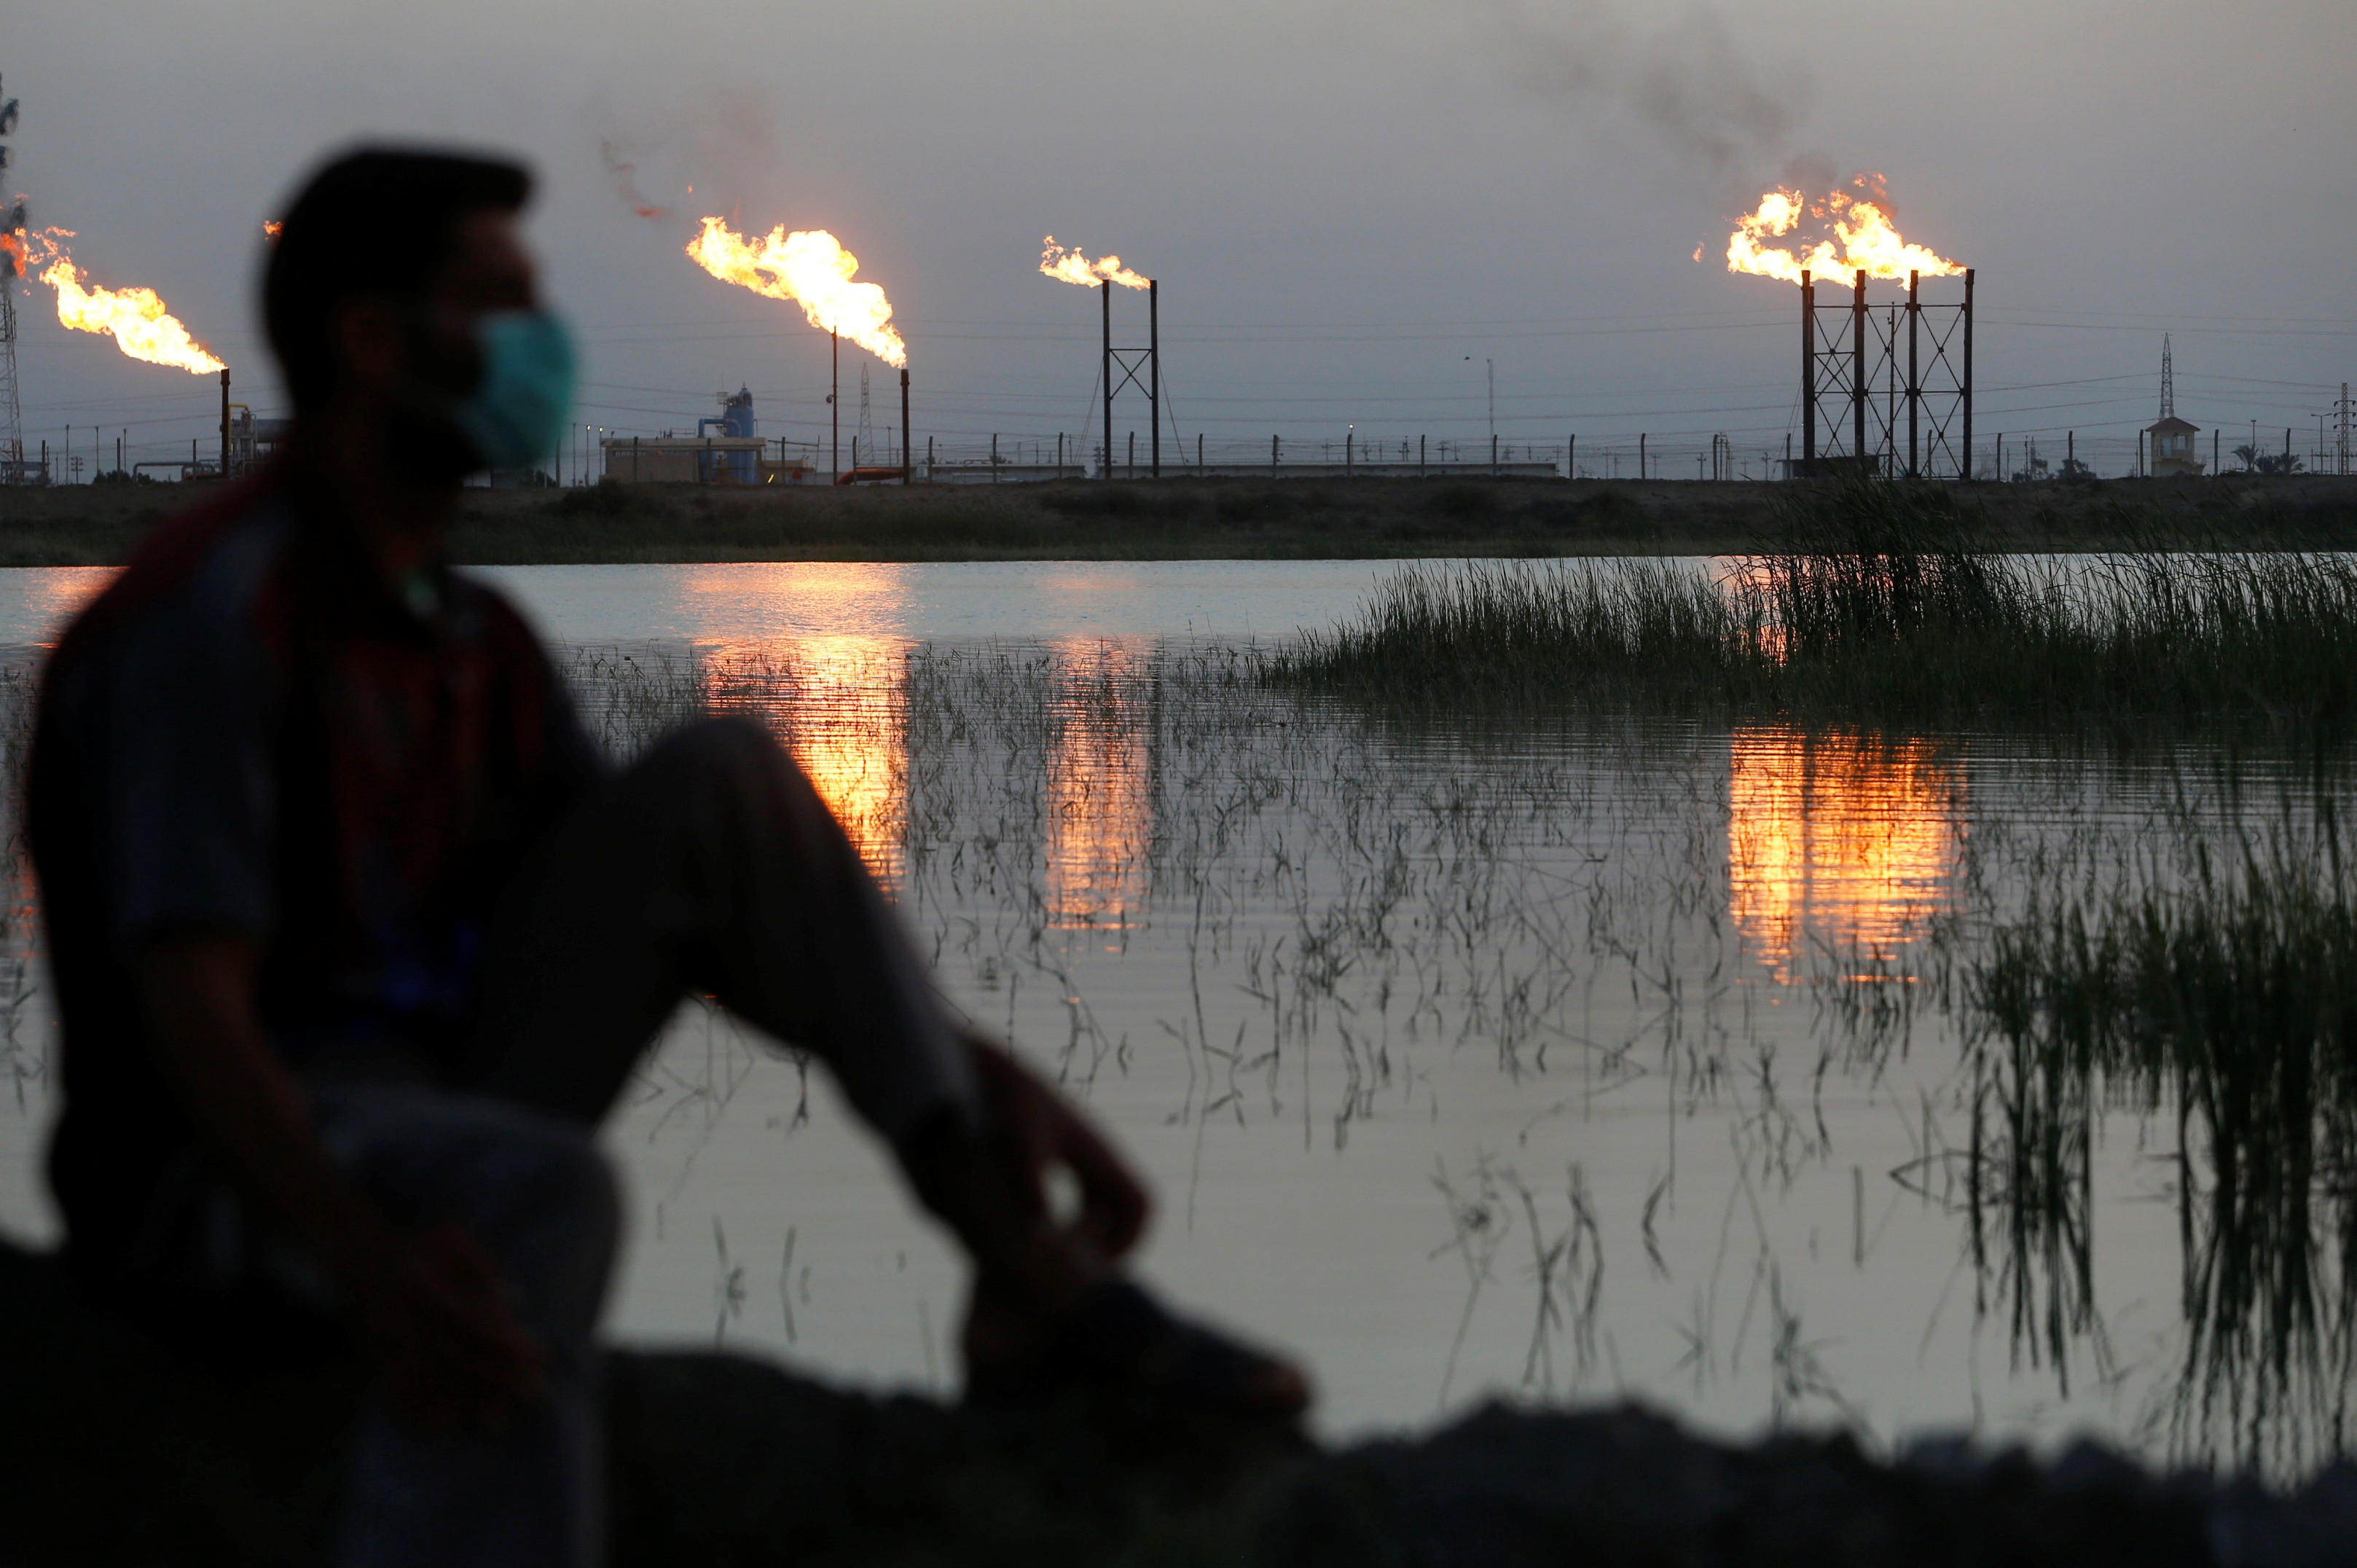 Flames emerge from flare stacks at an oilfield in Iraq behind a man wearing a face mask as protection against coronavirus. Photo: Reuters